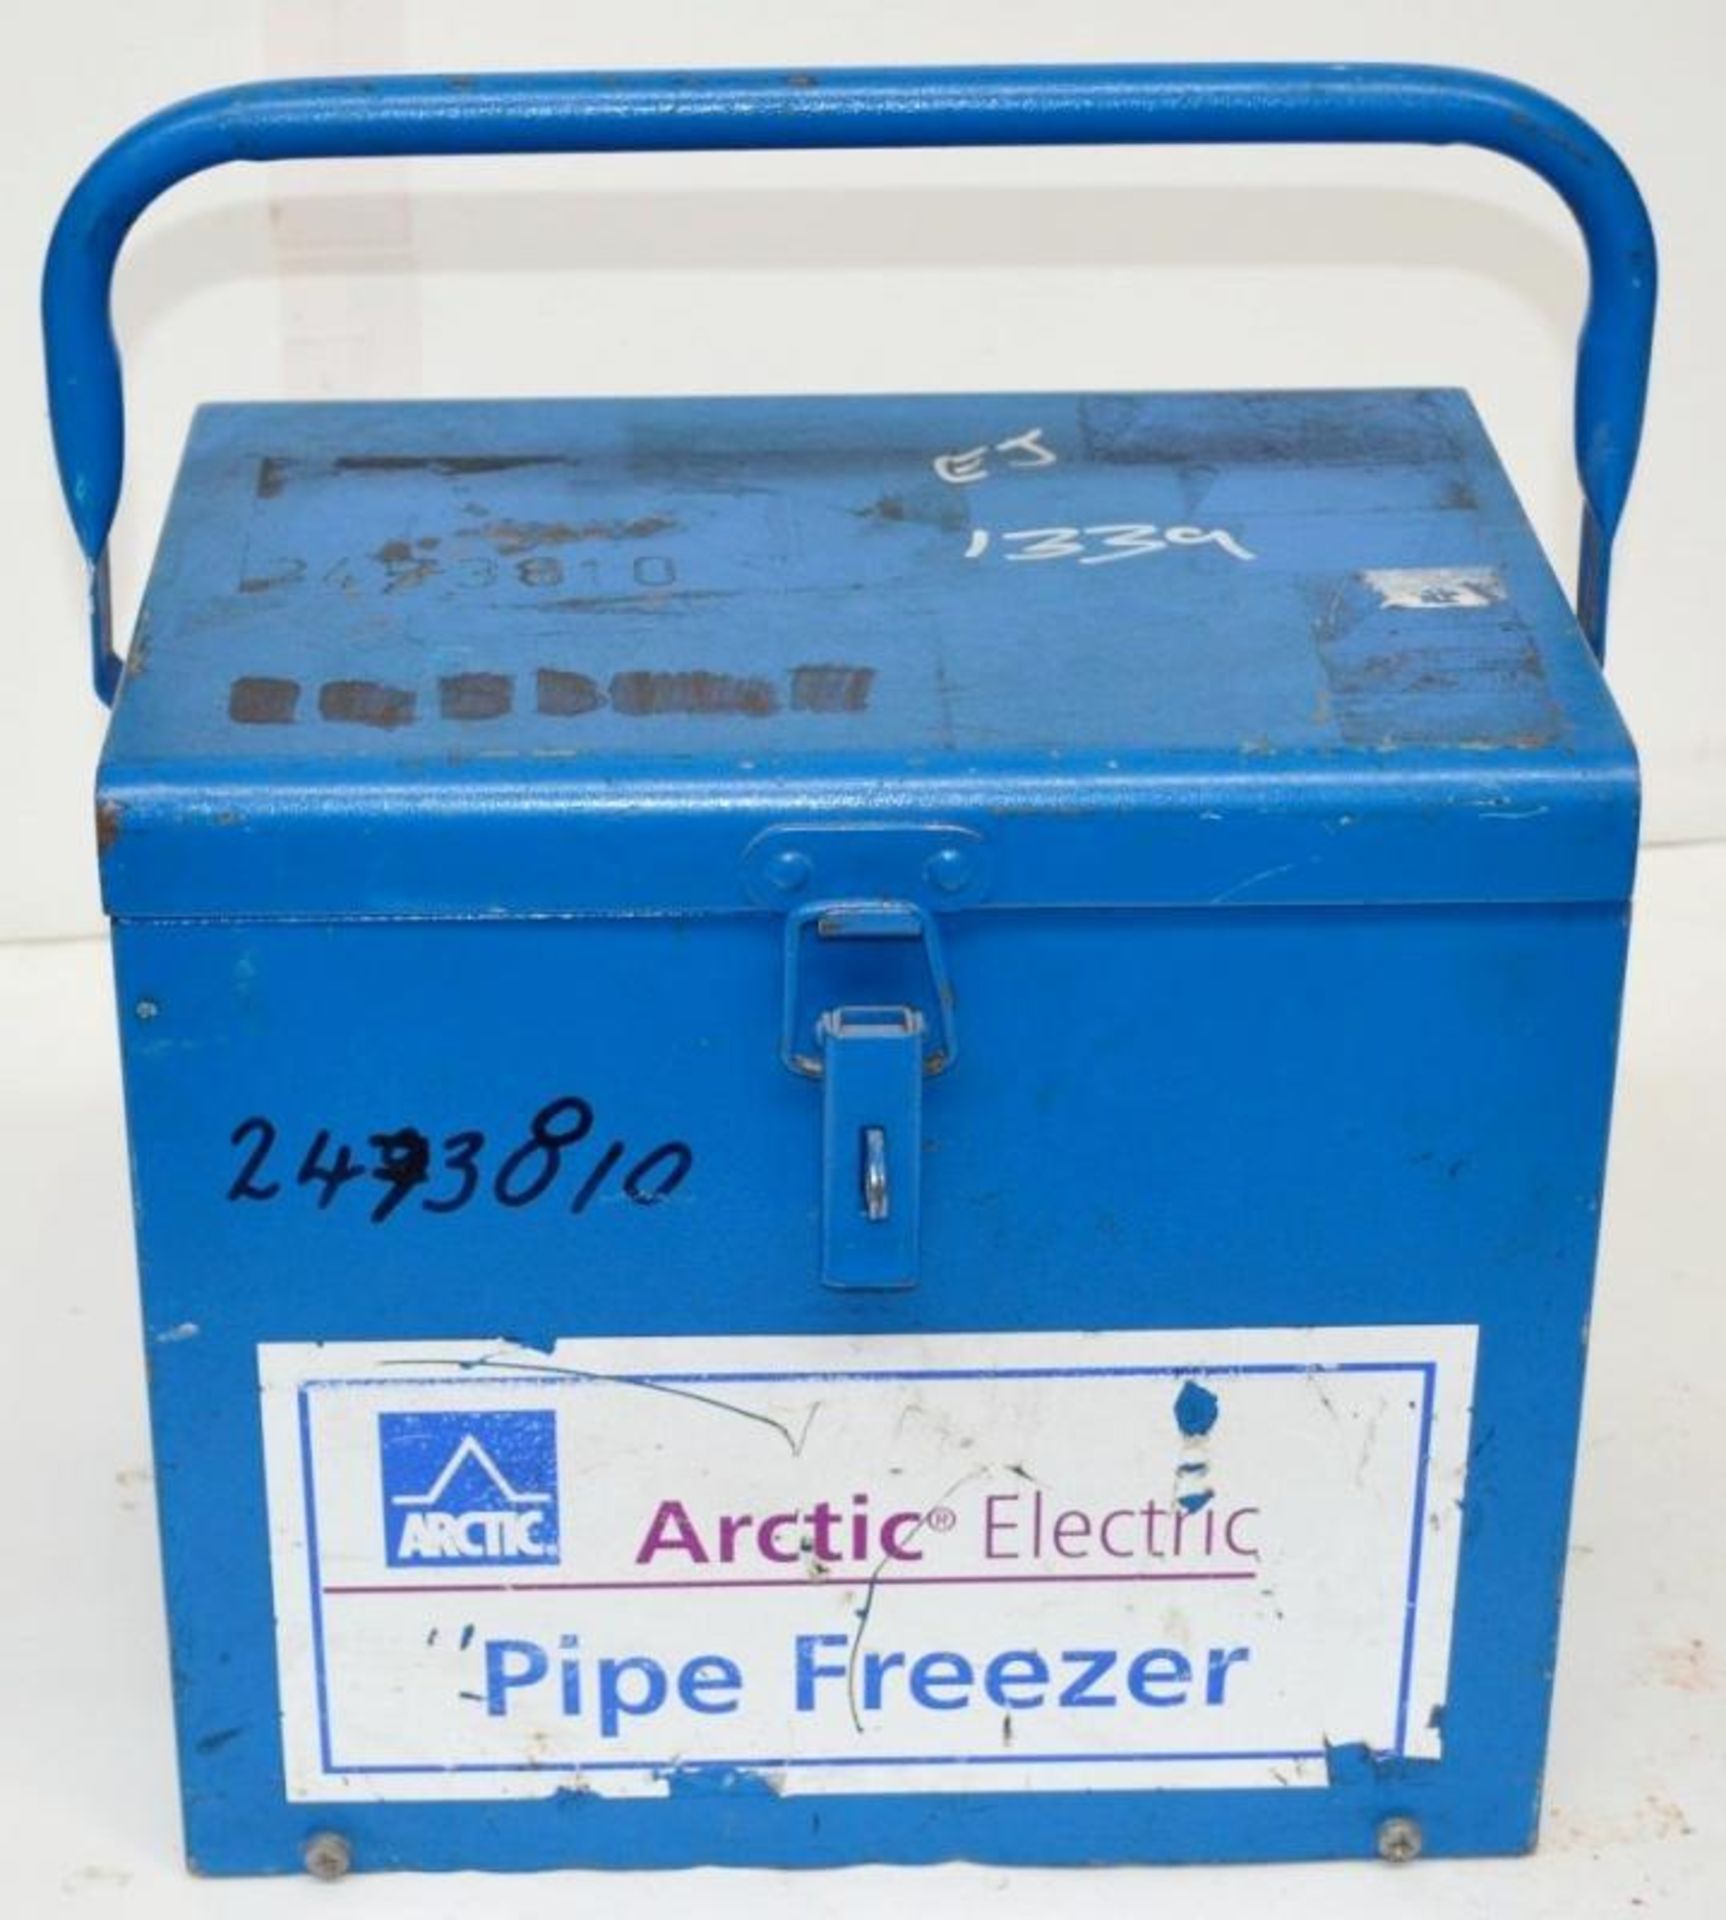 1 x Freeze Master Arctic Freeze Electric Pipe Freezer - UK Mains 220/240 volt - Used In